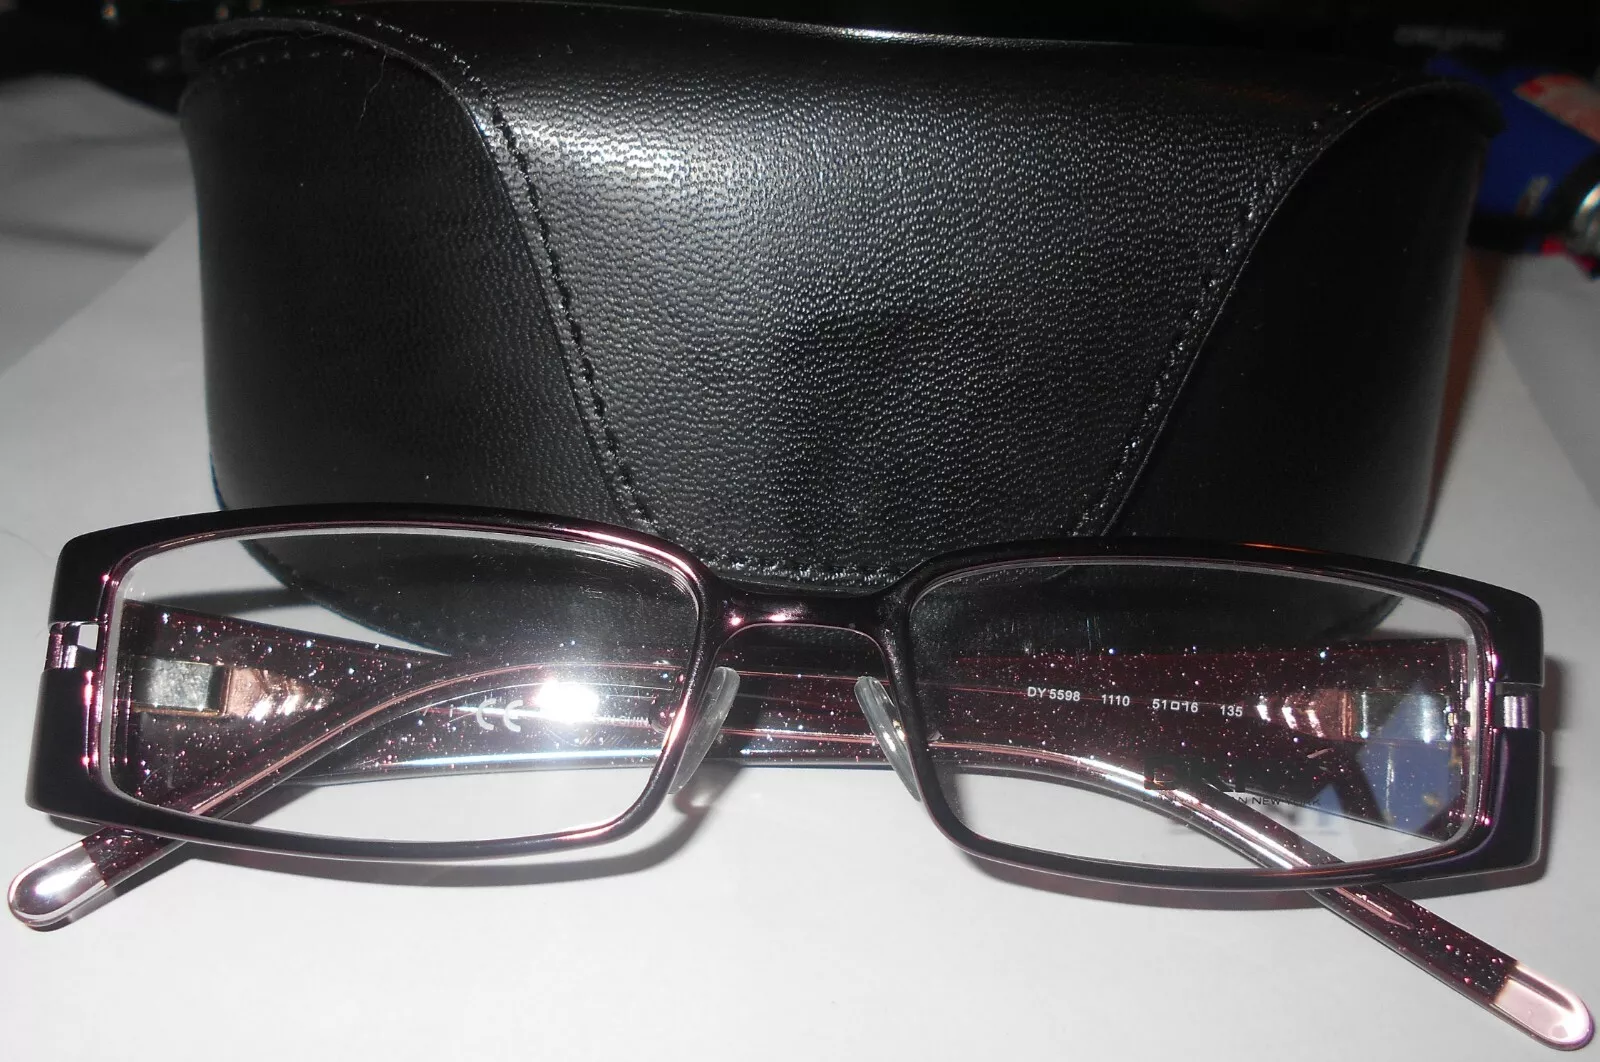 DNKY Glasses/Frames 5598 1110 51 16 135 -new with case - brand new - $25.00